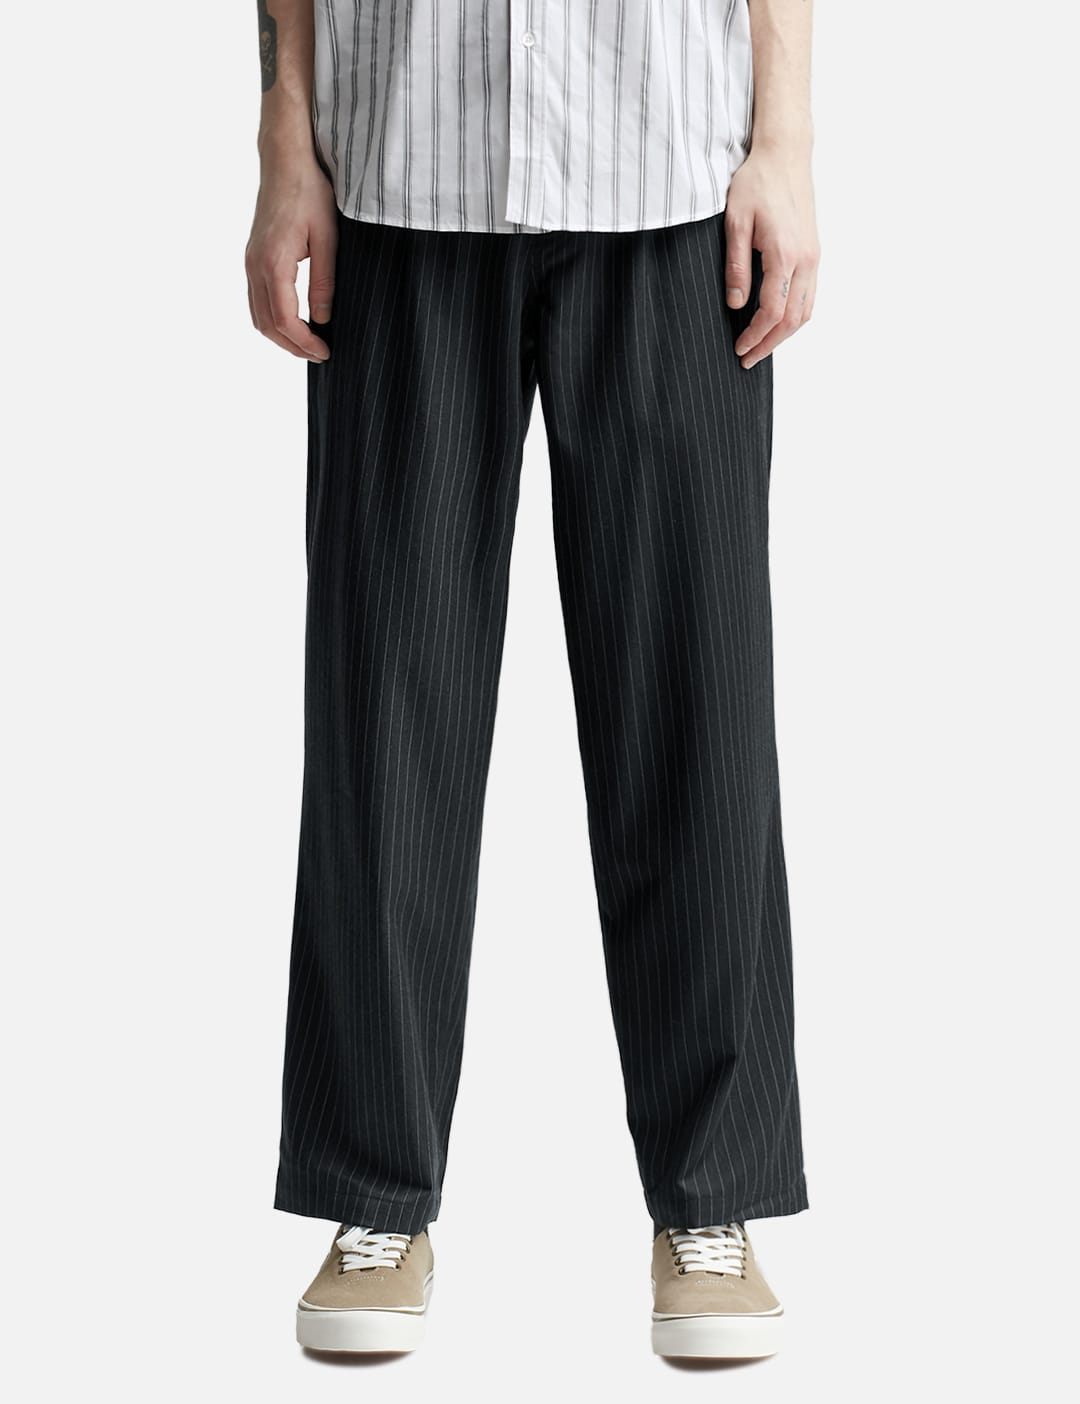 Stüssy - Stripe Volume Pleated Trousers | HBX - Globally Curated